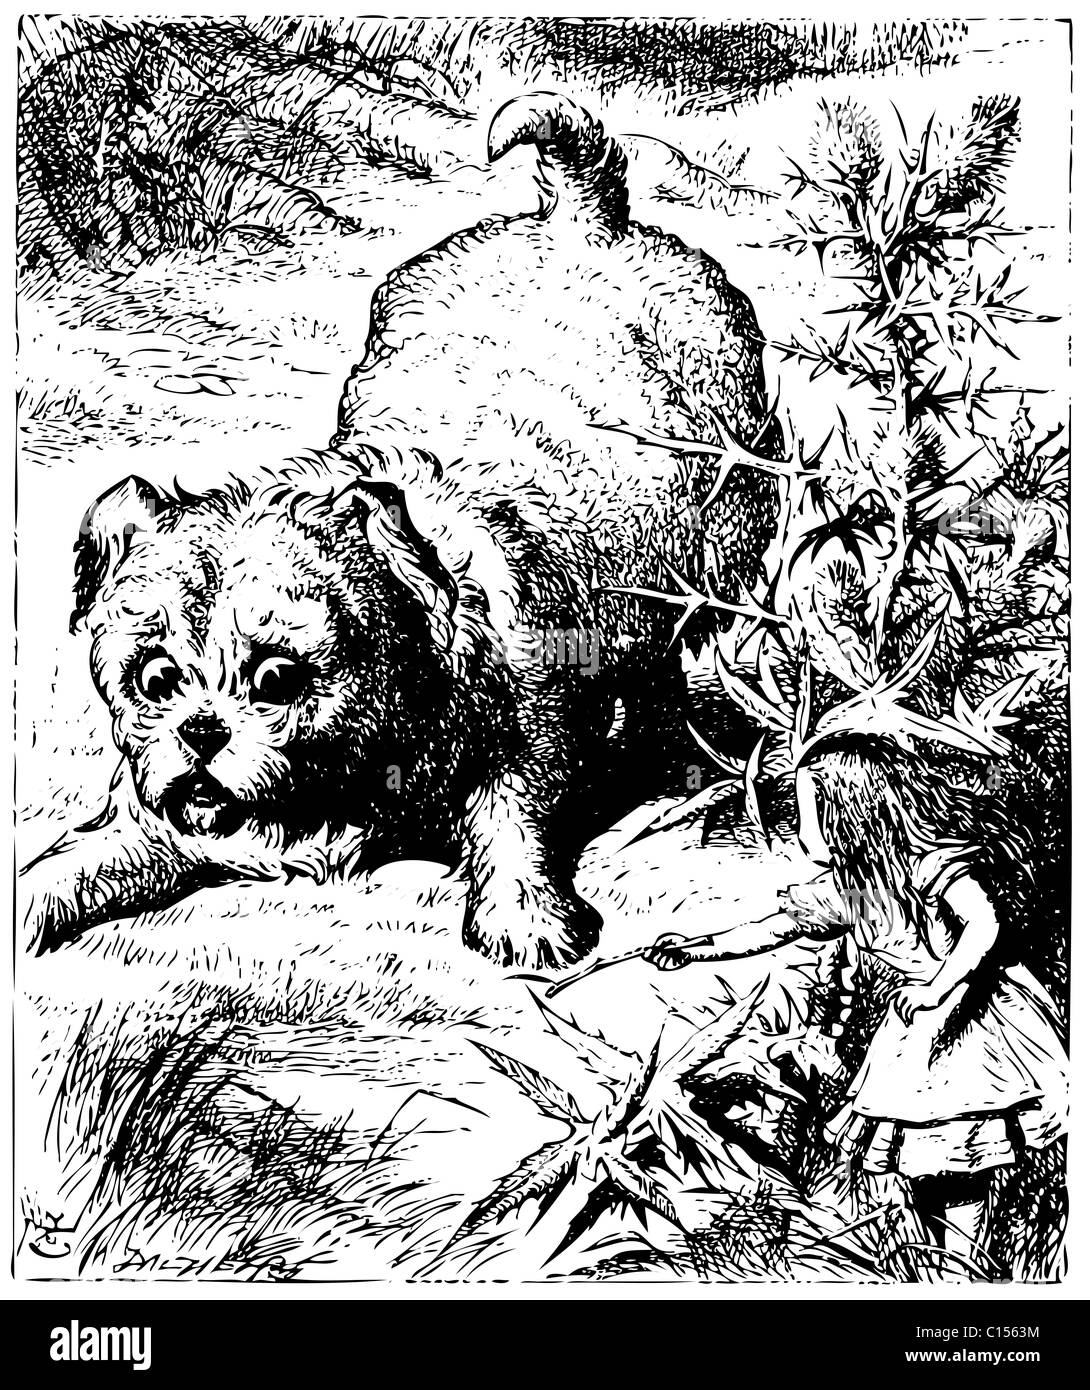 Alice in Wonderland old engraving. Alice showing a stick to an enormous puppy or dog: Alice's Adventures in Wonderland. Stock Photo